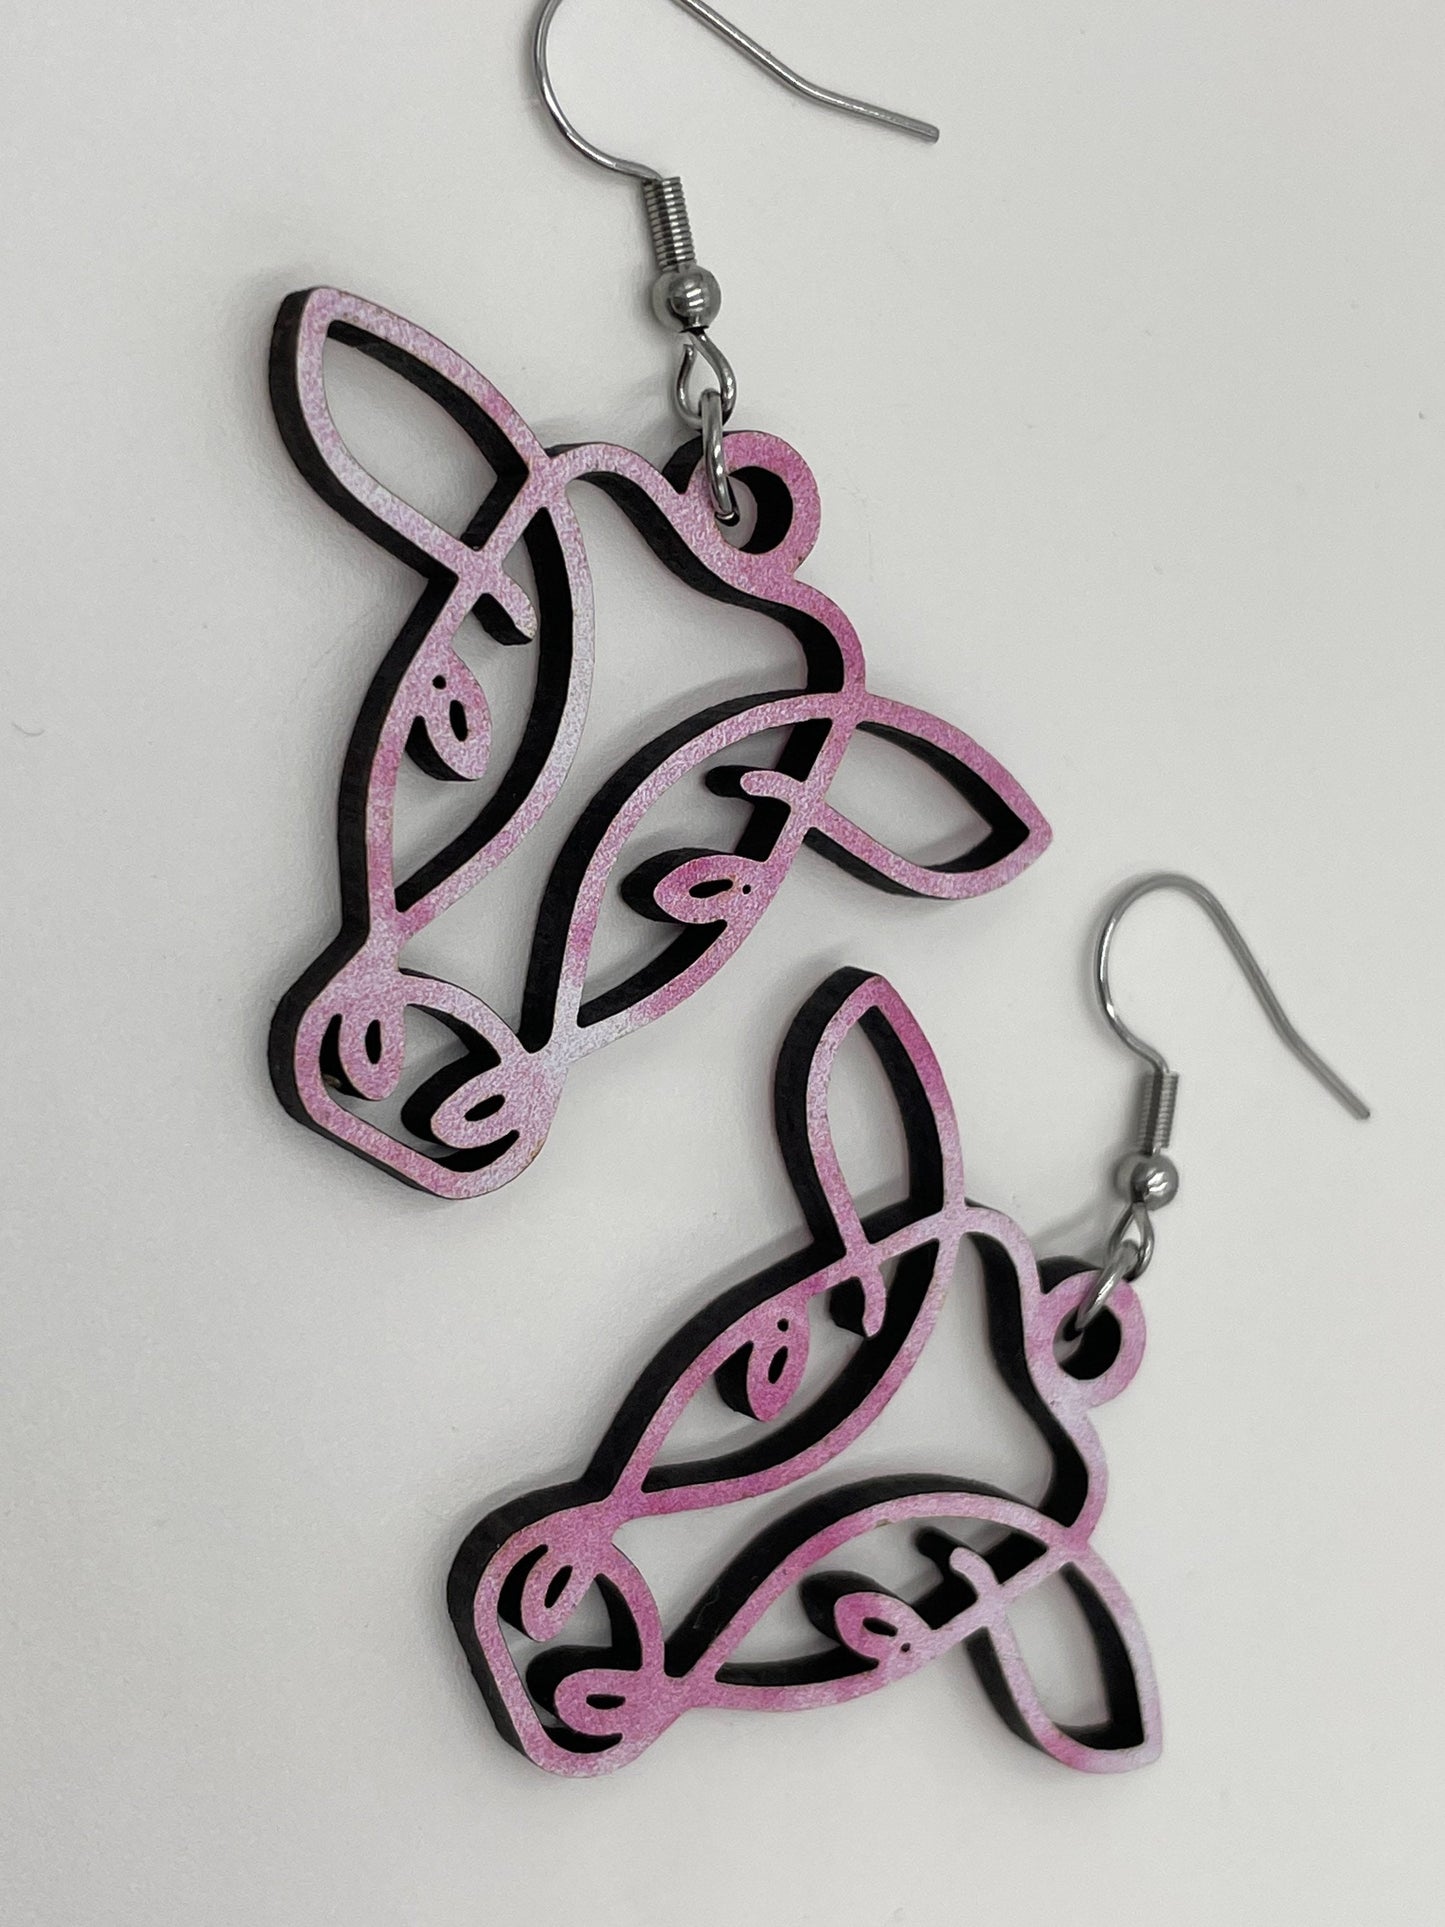 Cow Earrings, Pink and White Wooden, Hypoallergenic Stainless Steel